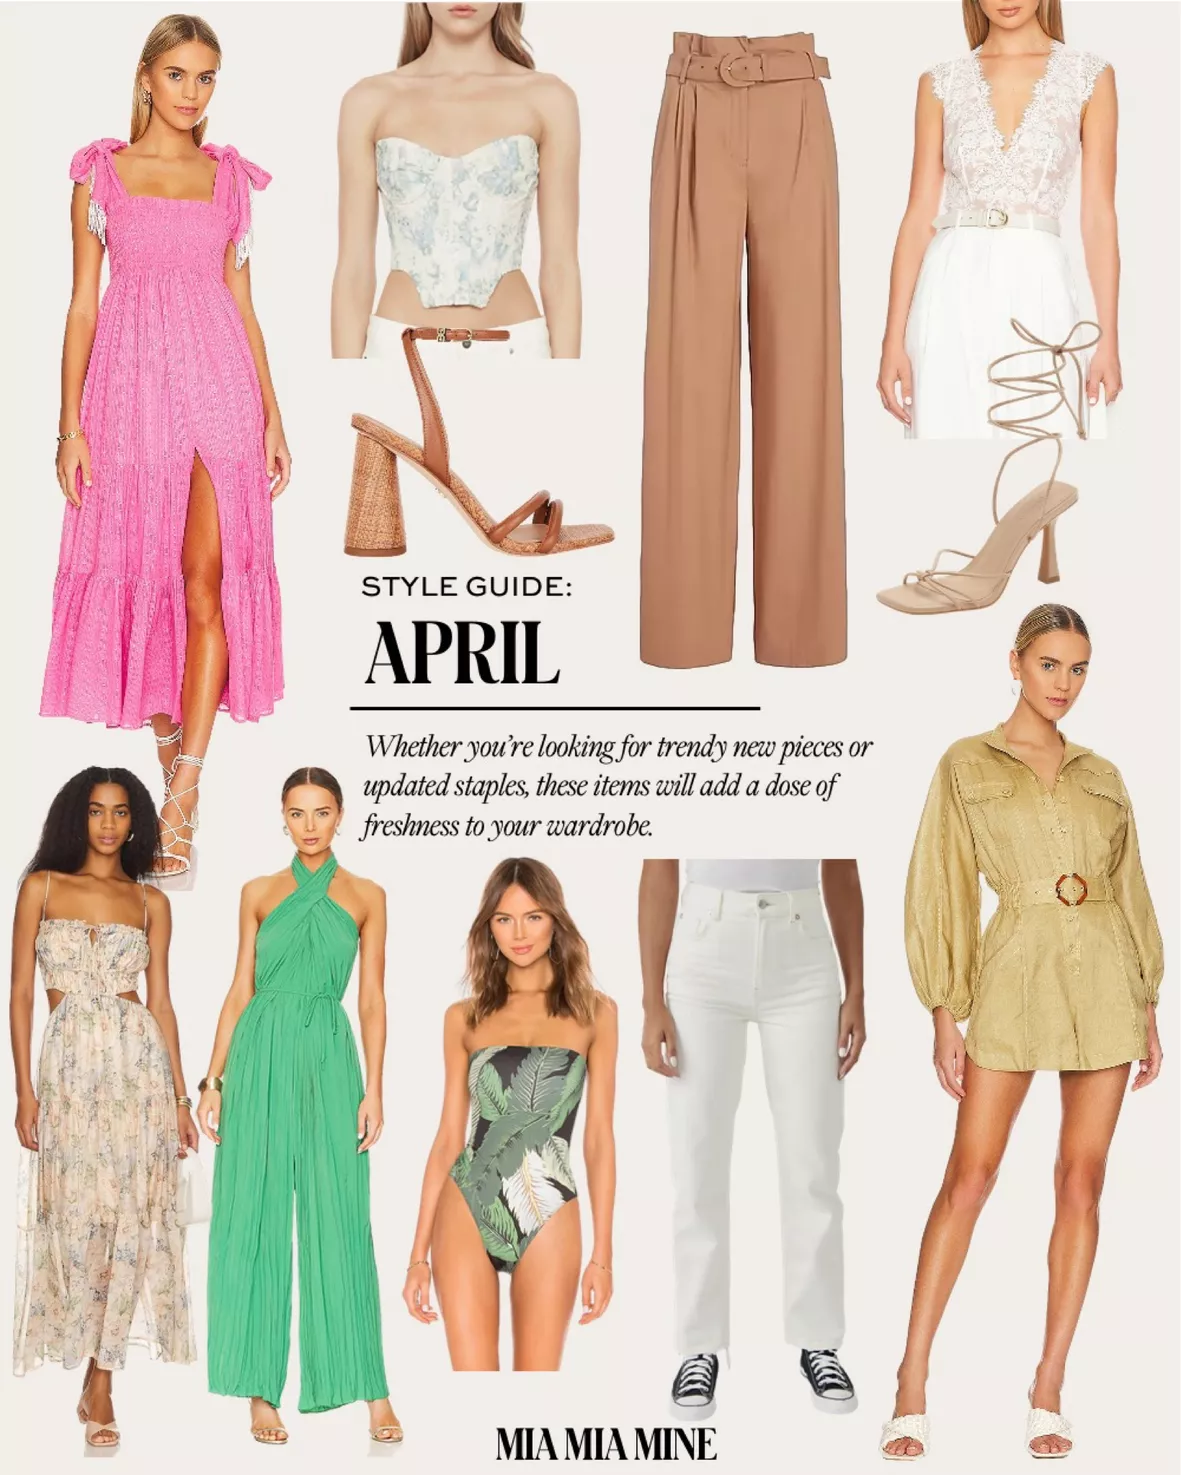 A Week of Chic Spring Outfits - Mia Mia Mine